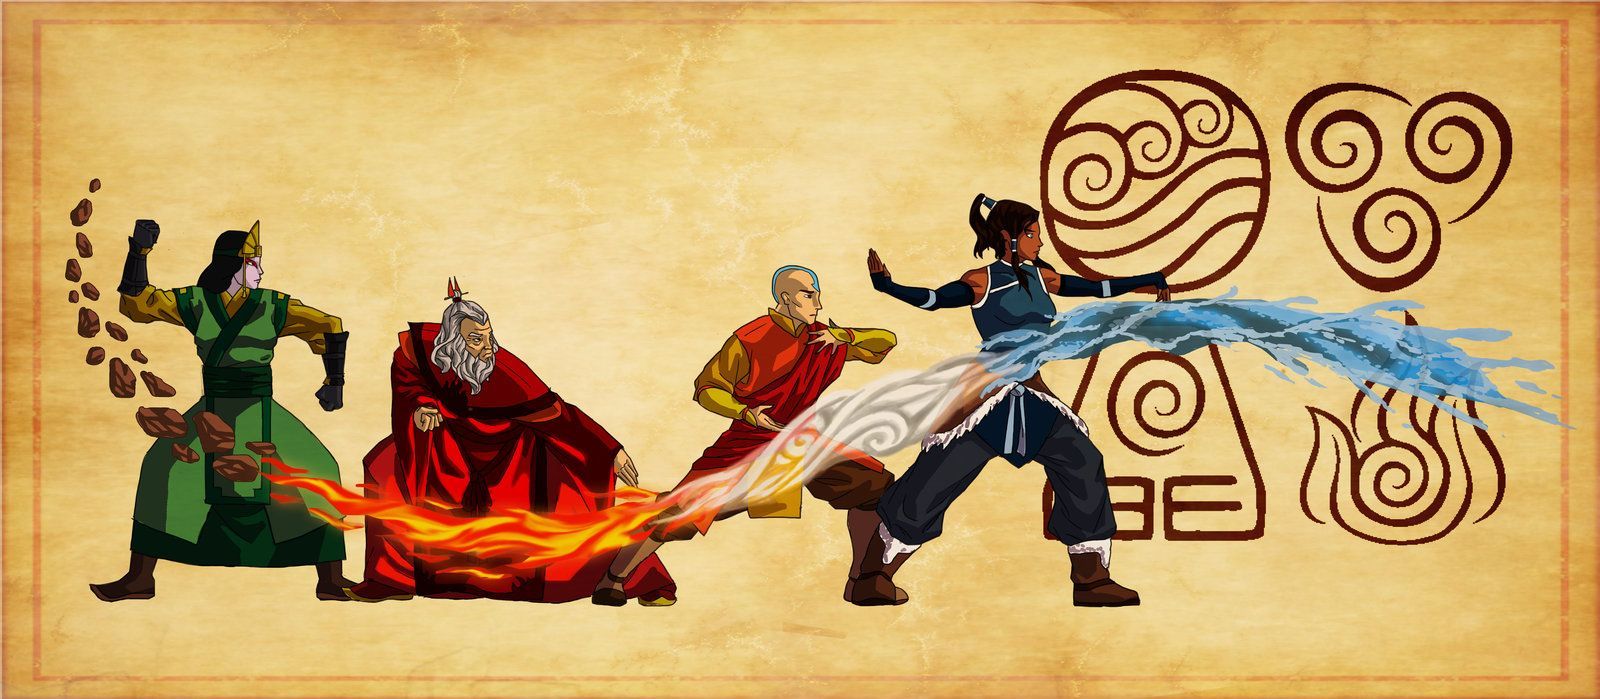 The Avatar Cycle by wildcard24. Avatar airbender, Avatar, The last airbender